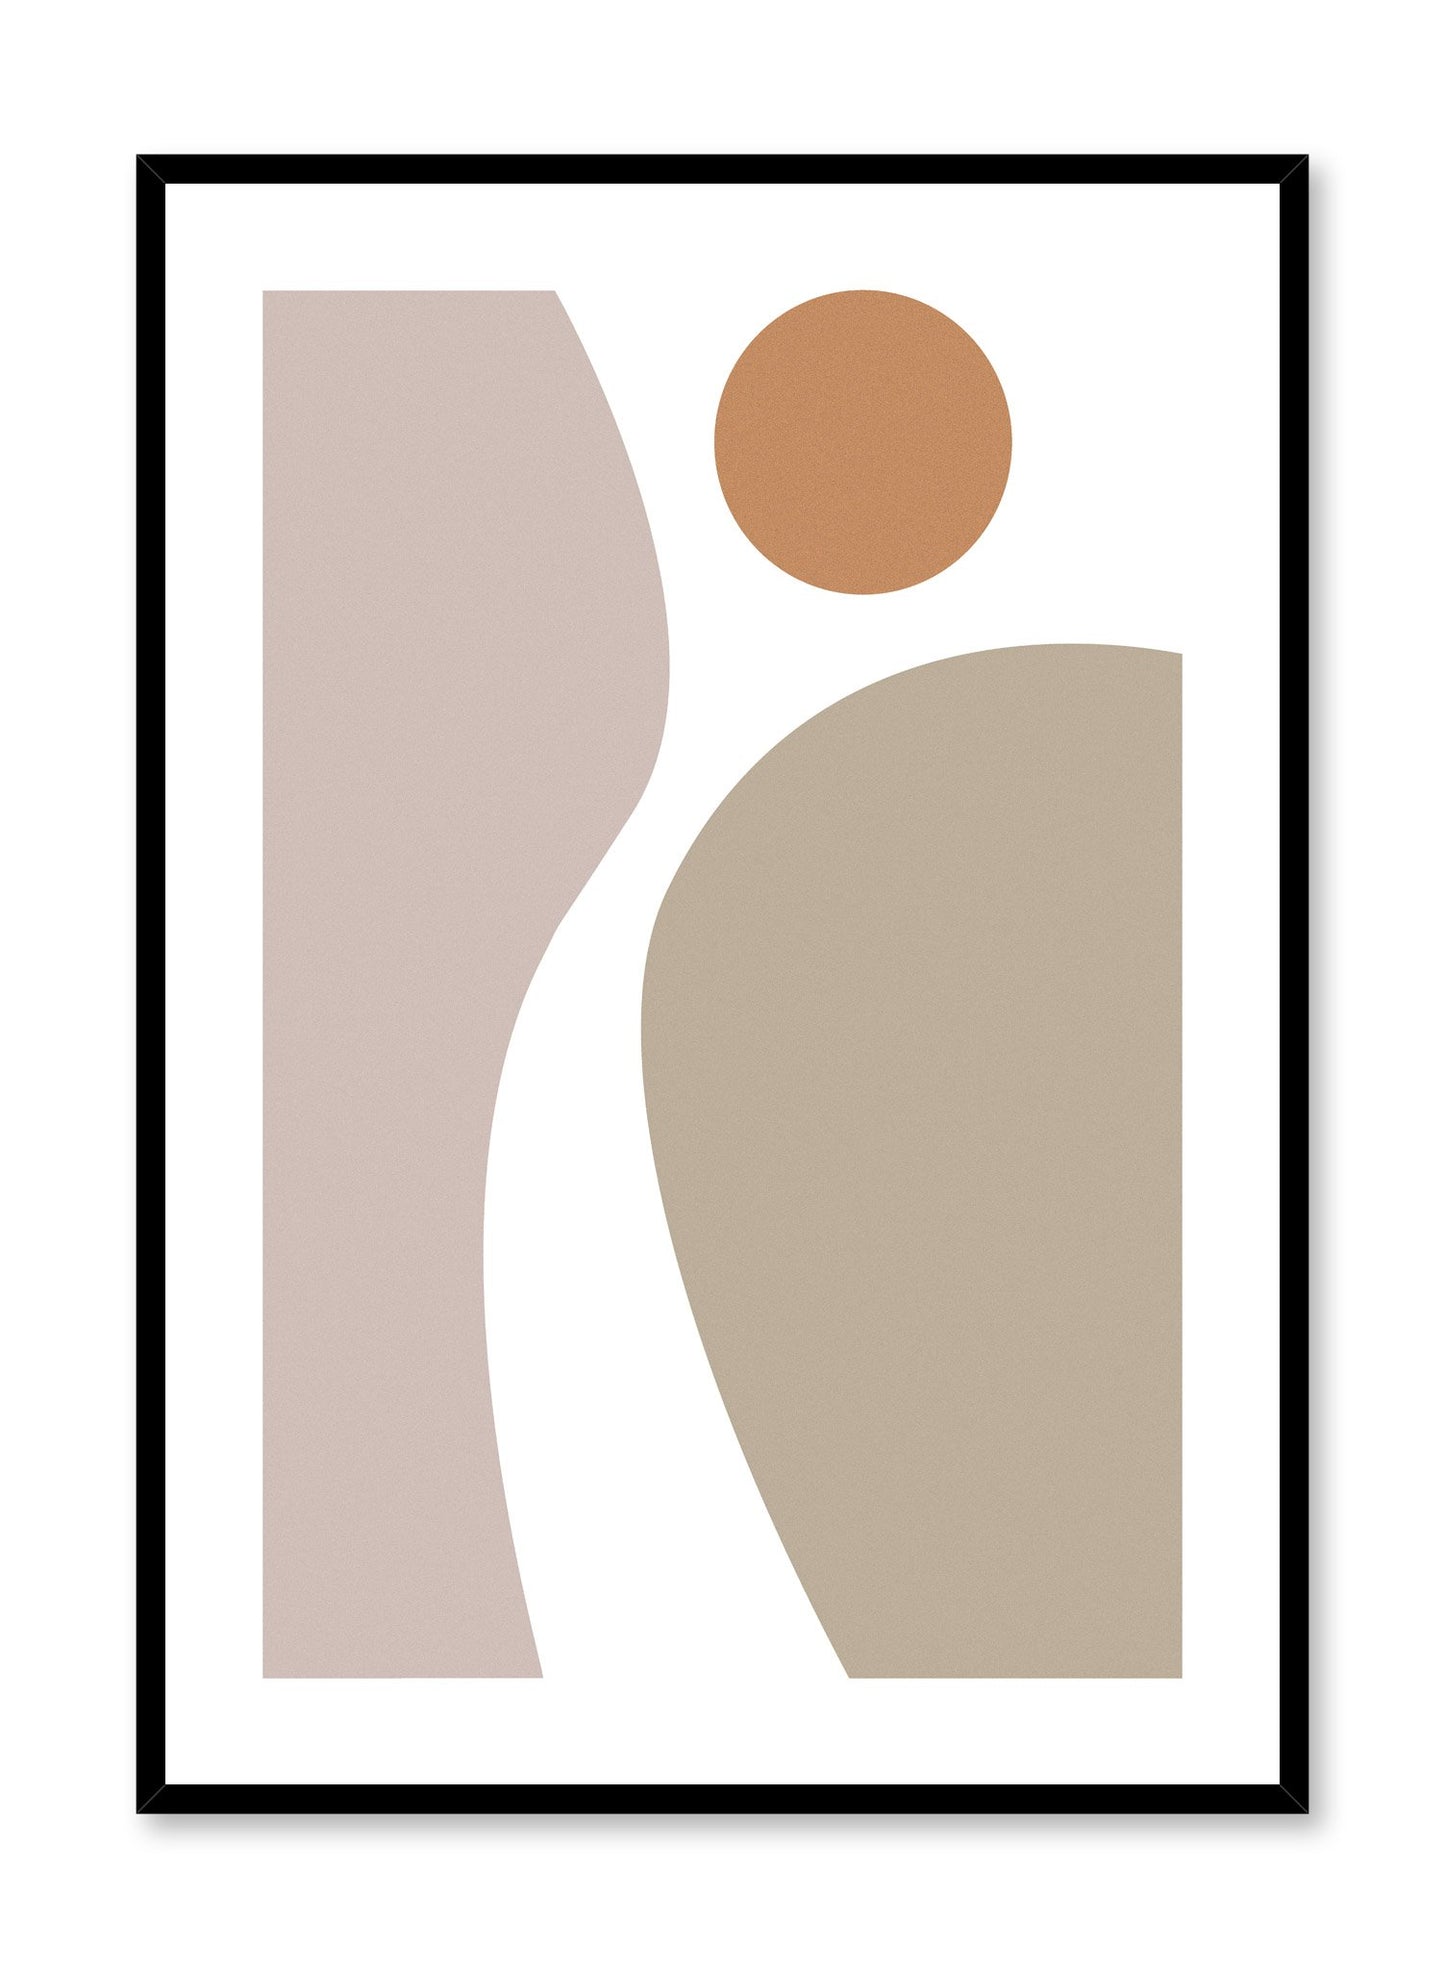 Minimalist design poster by Opposite Wall with abstract curved shapes, Movement poster in Beige